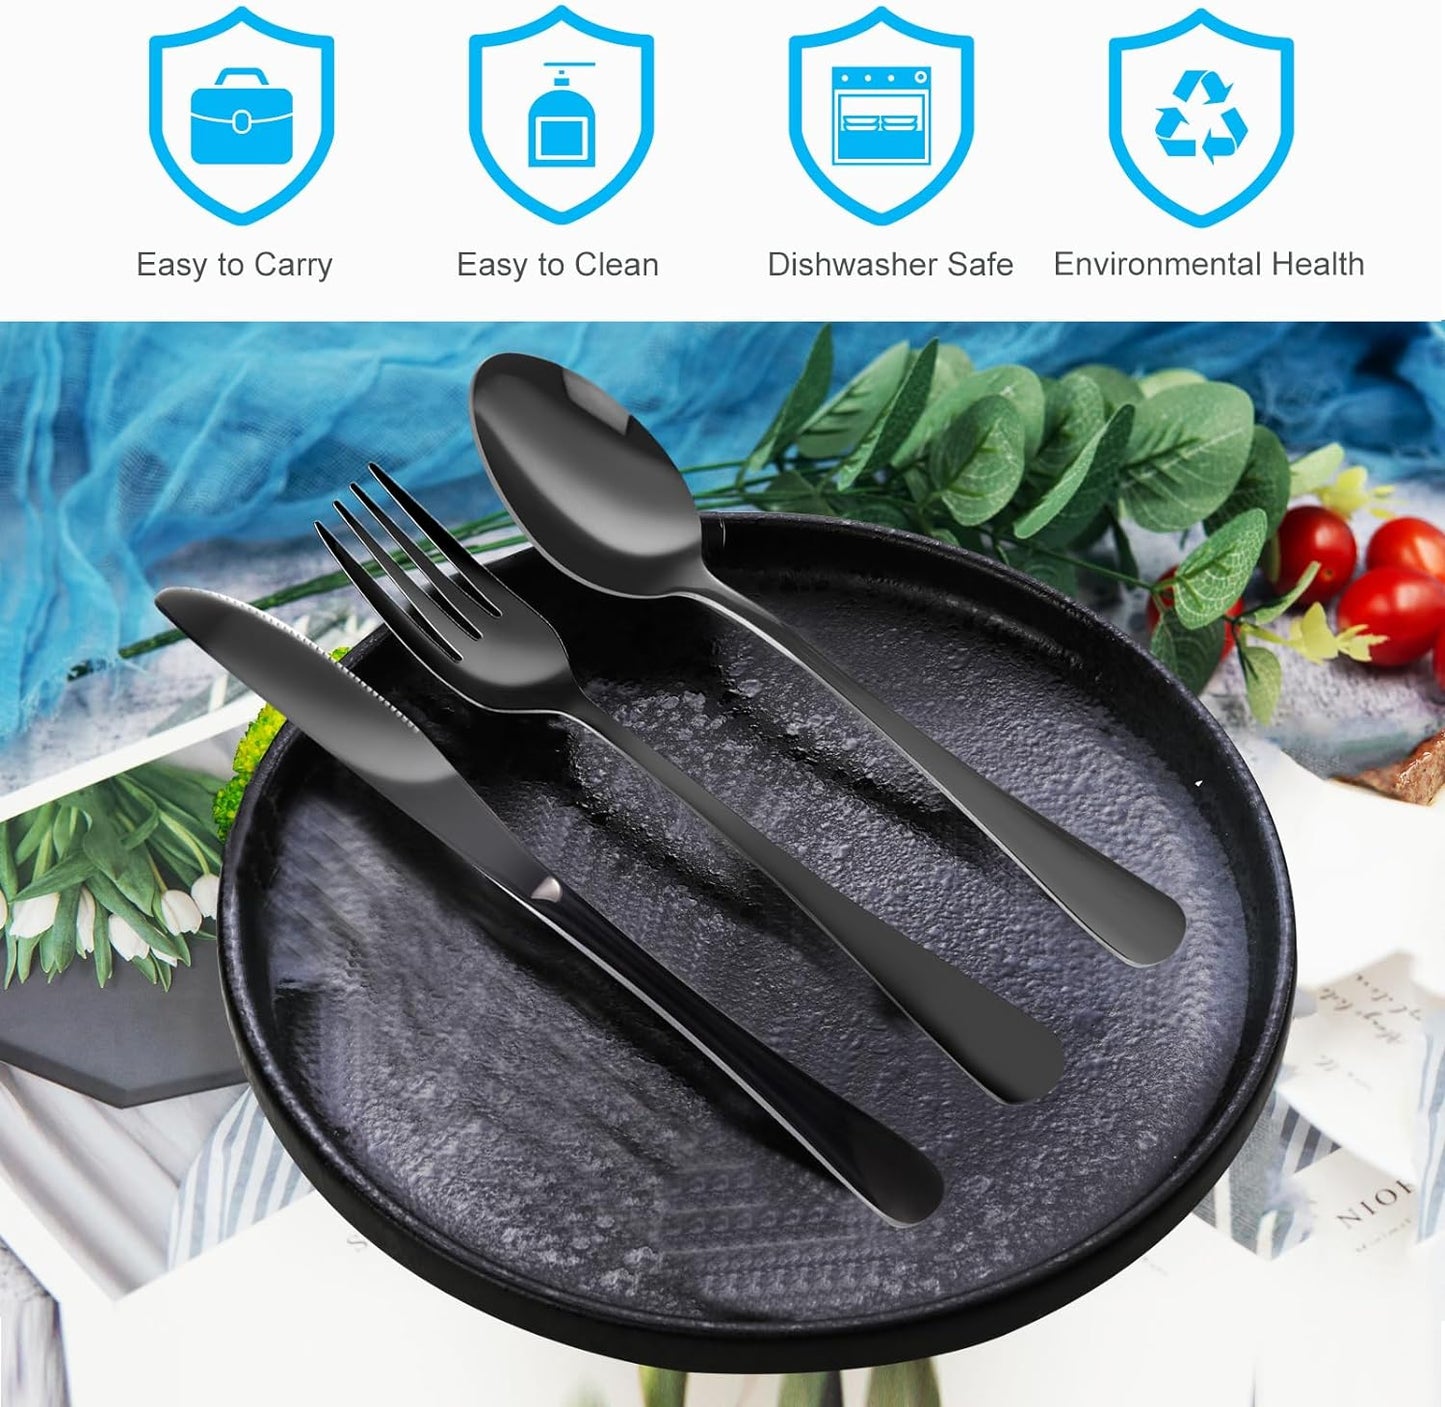 4PCS Premium Travel Utensils With Case, Stainless Steel Reusable Portable Utensils Set With Case, Lengnoyp Travel Silverware Set With Case for Lunch Box Includ Fork Spoon Knife Set, Black